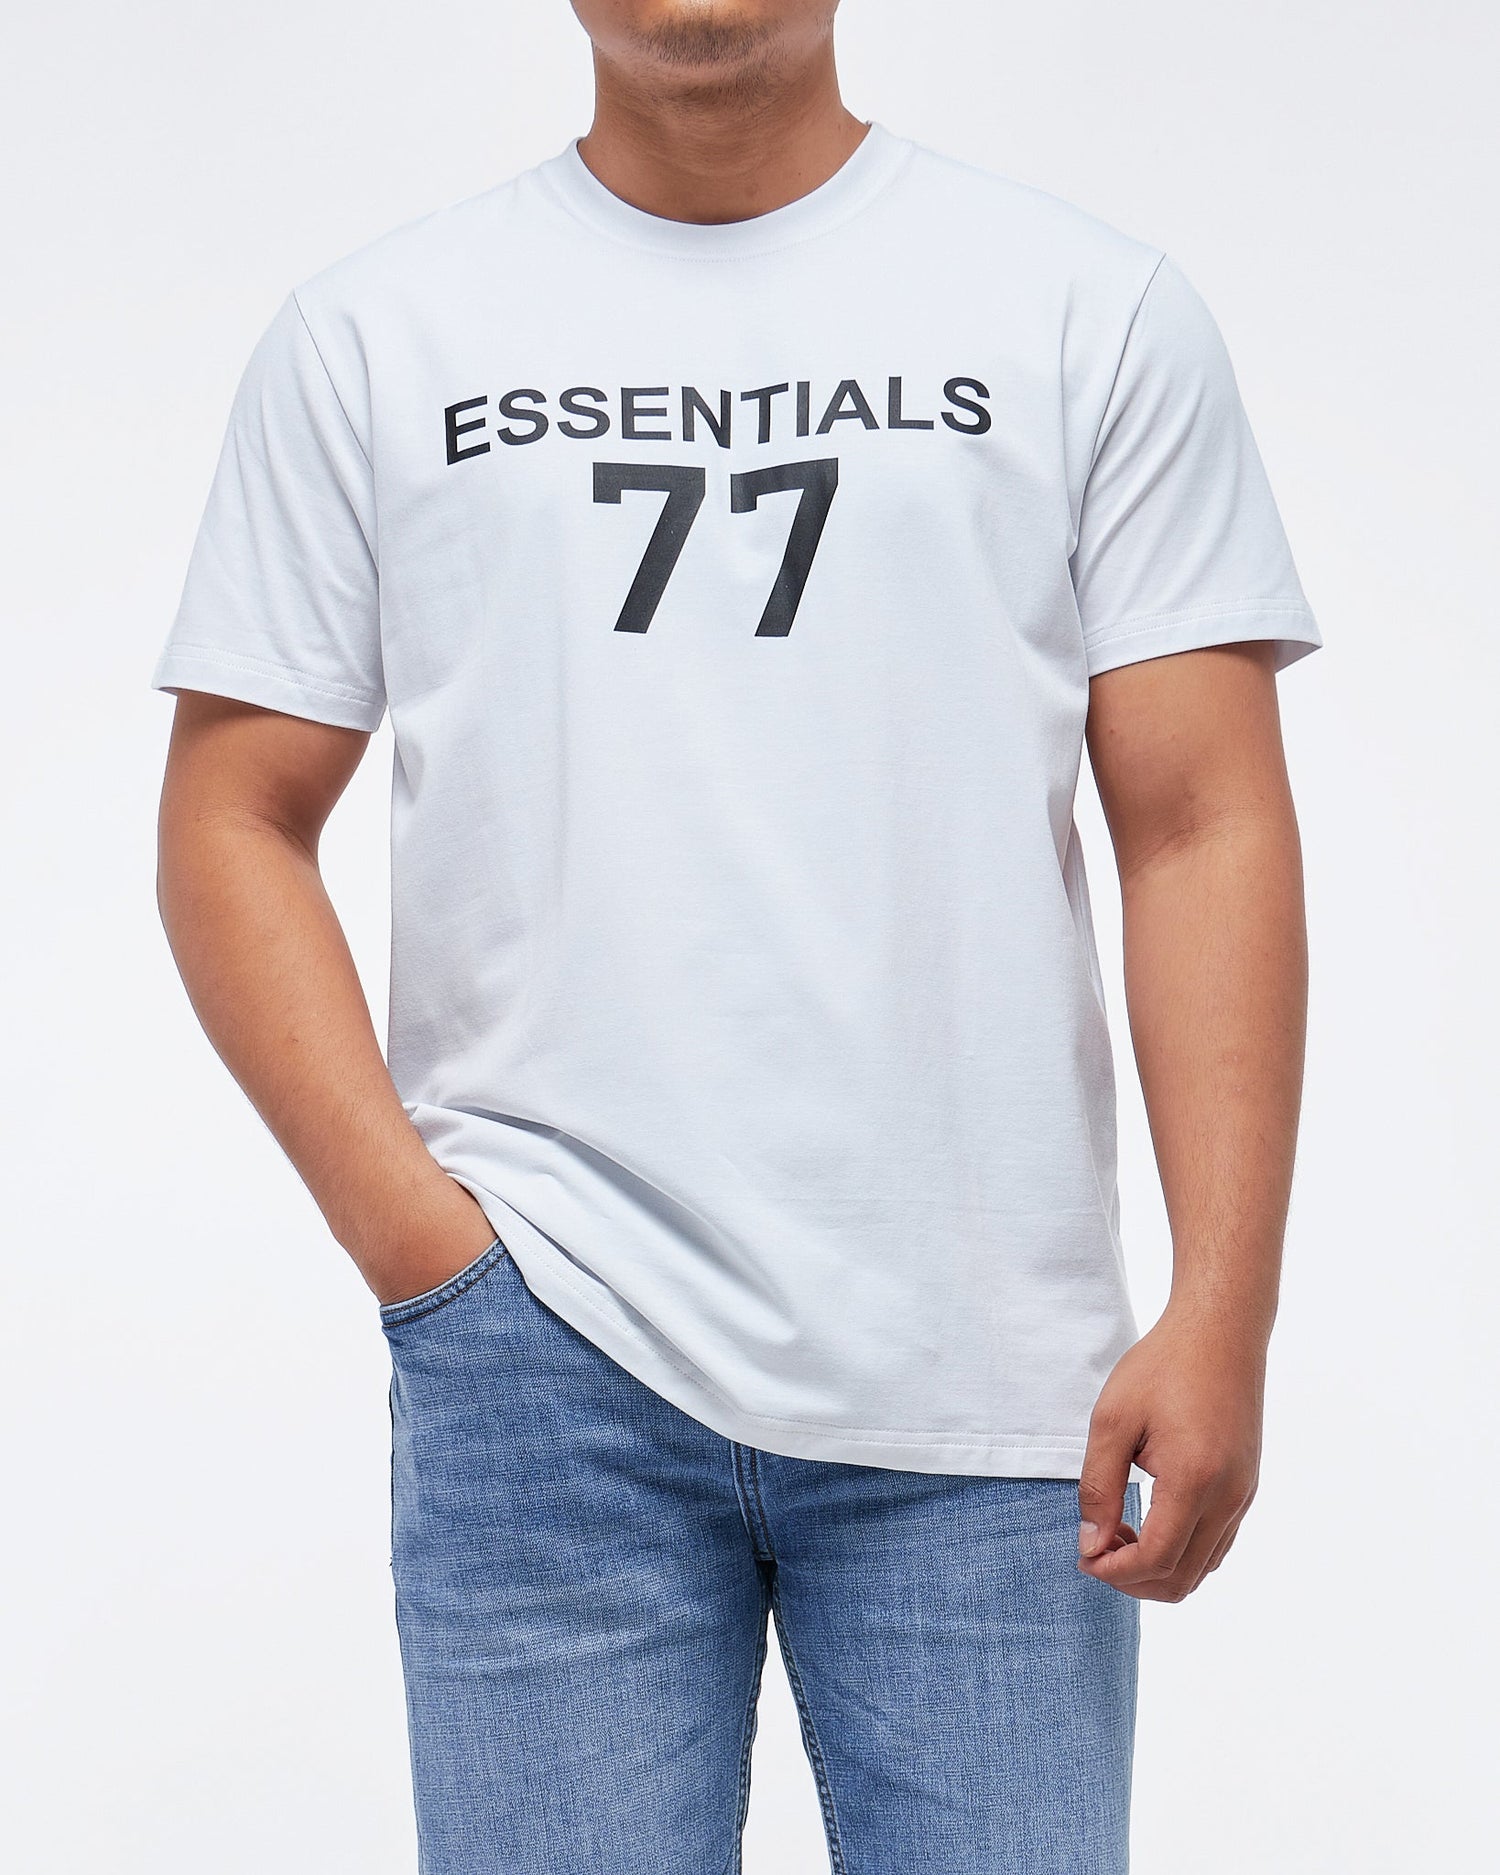 MOI OUTFIT-Essentials 77 Printed Men T-Shirt 14.50